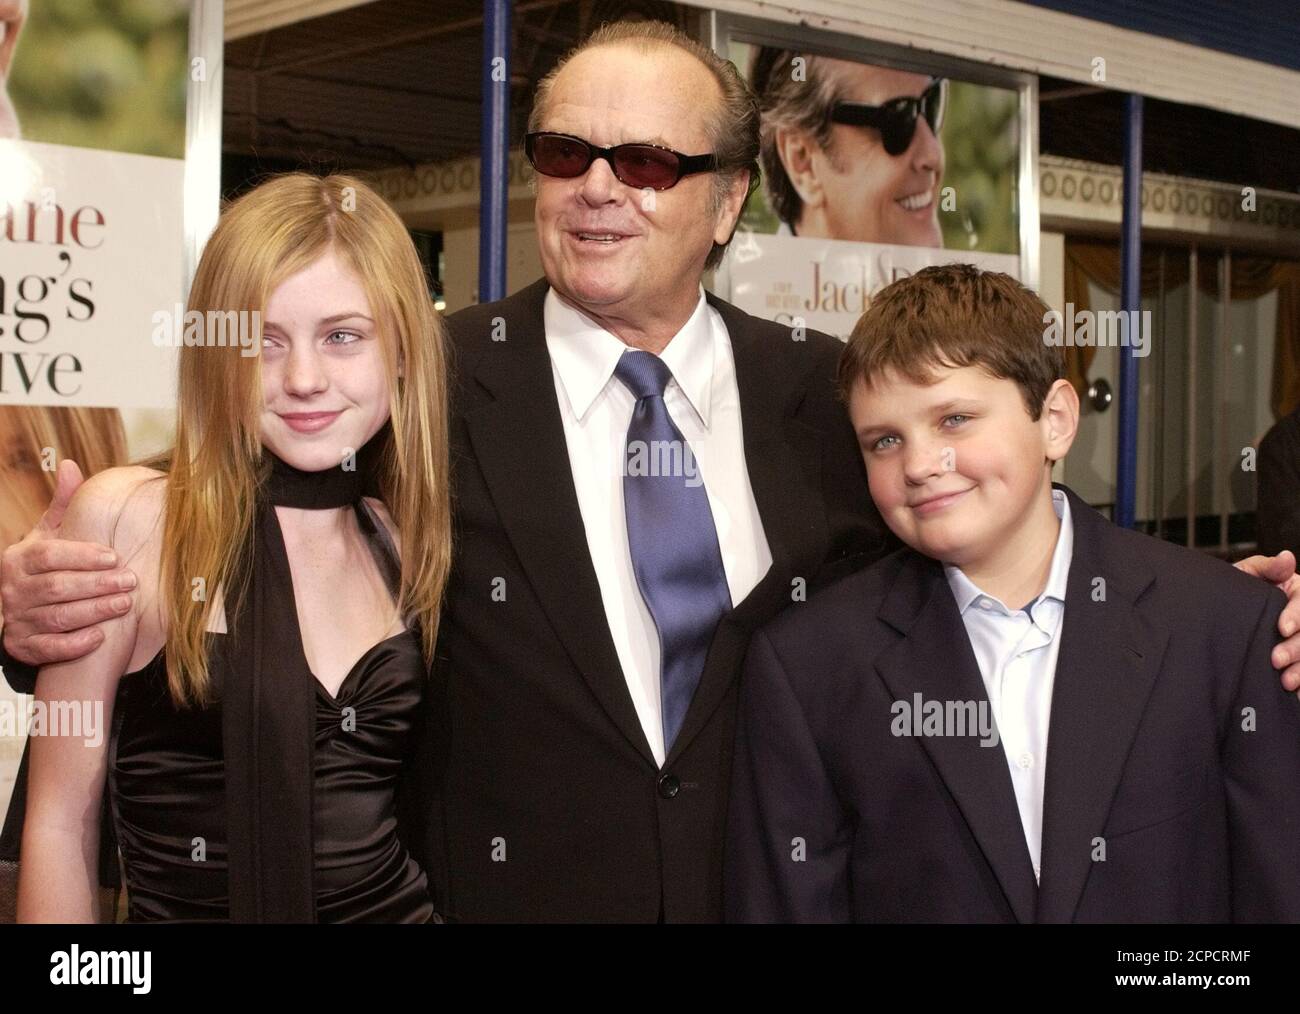 Actor Jack Nicholson (C) arrives at the Los Angeles premiere of his movie, 'Something's Gotta Give,' with his children Lorraine (L) and Raymond, December 8, 2003. The film opens in the U.S. on December 12, 2003. REUTERS/Lucy Nicholson    PP03120017  LN/HB Stock Photo